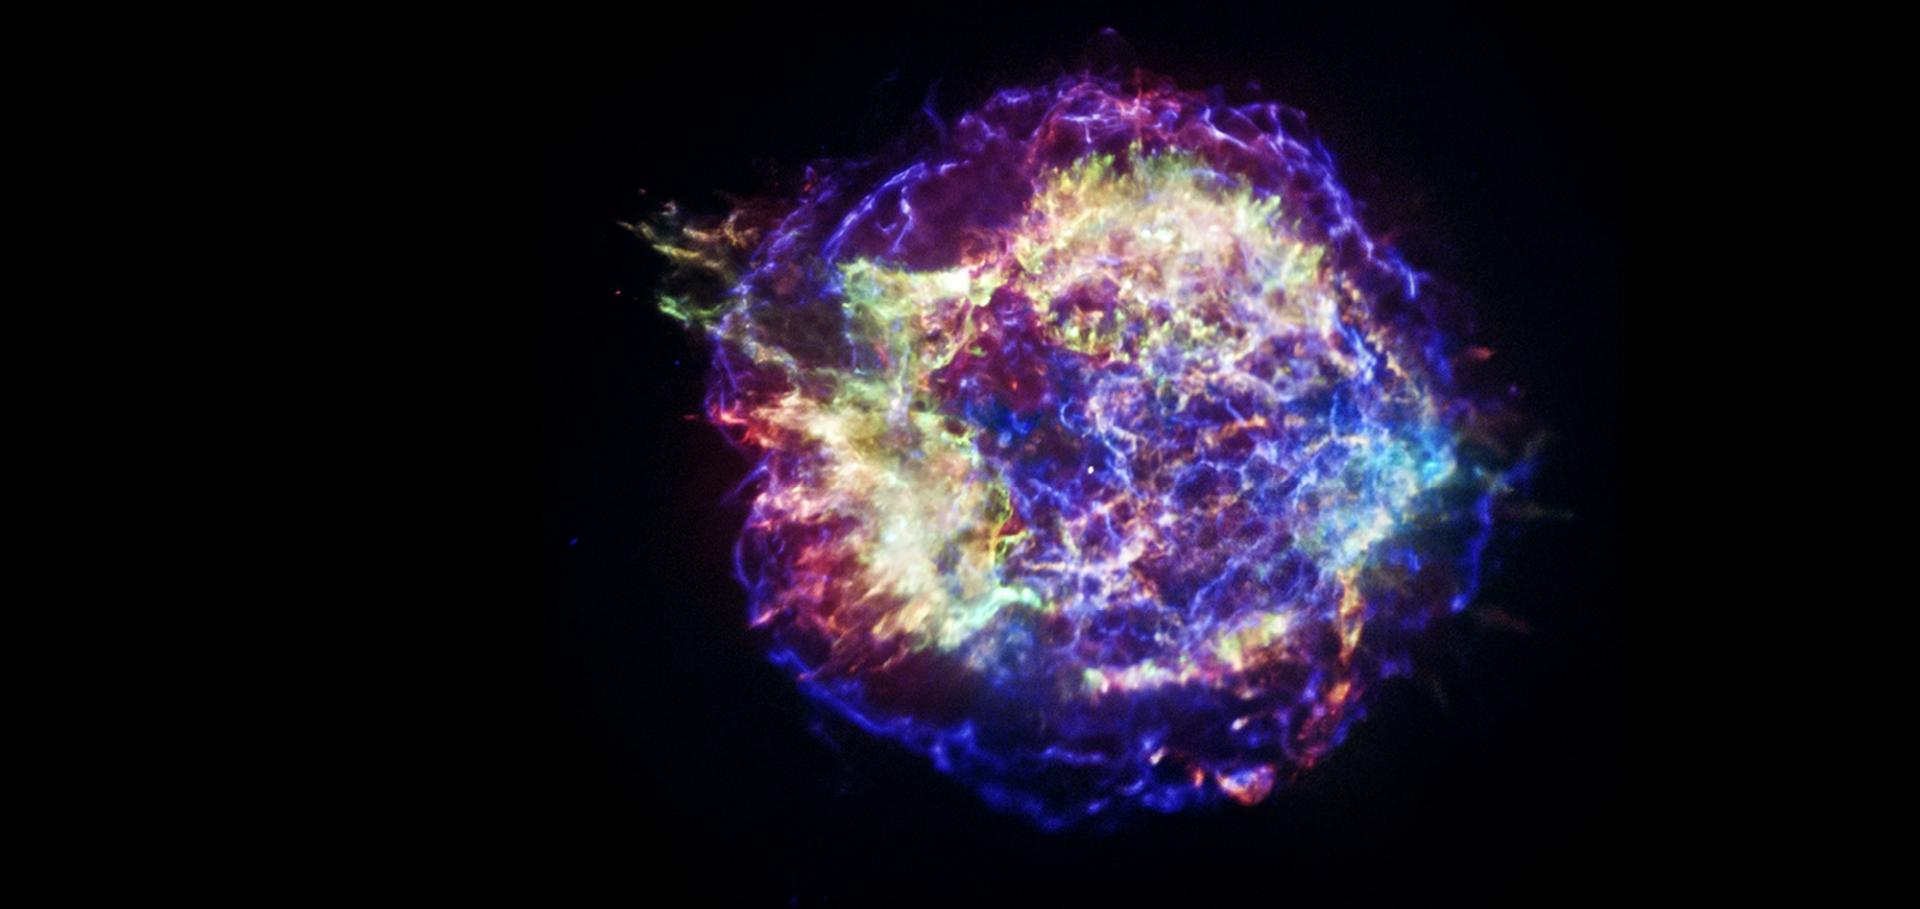 The Cassiopeia A Supernova remnant and its Central Compact Object in X-rays